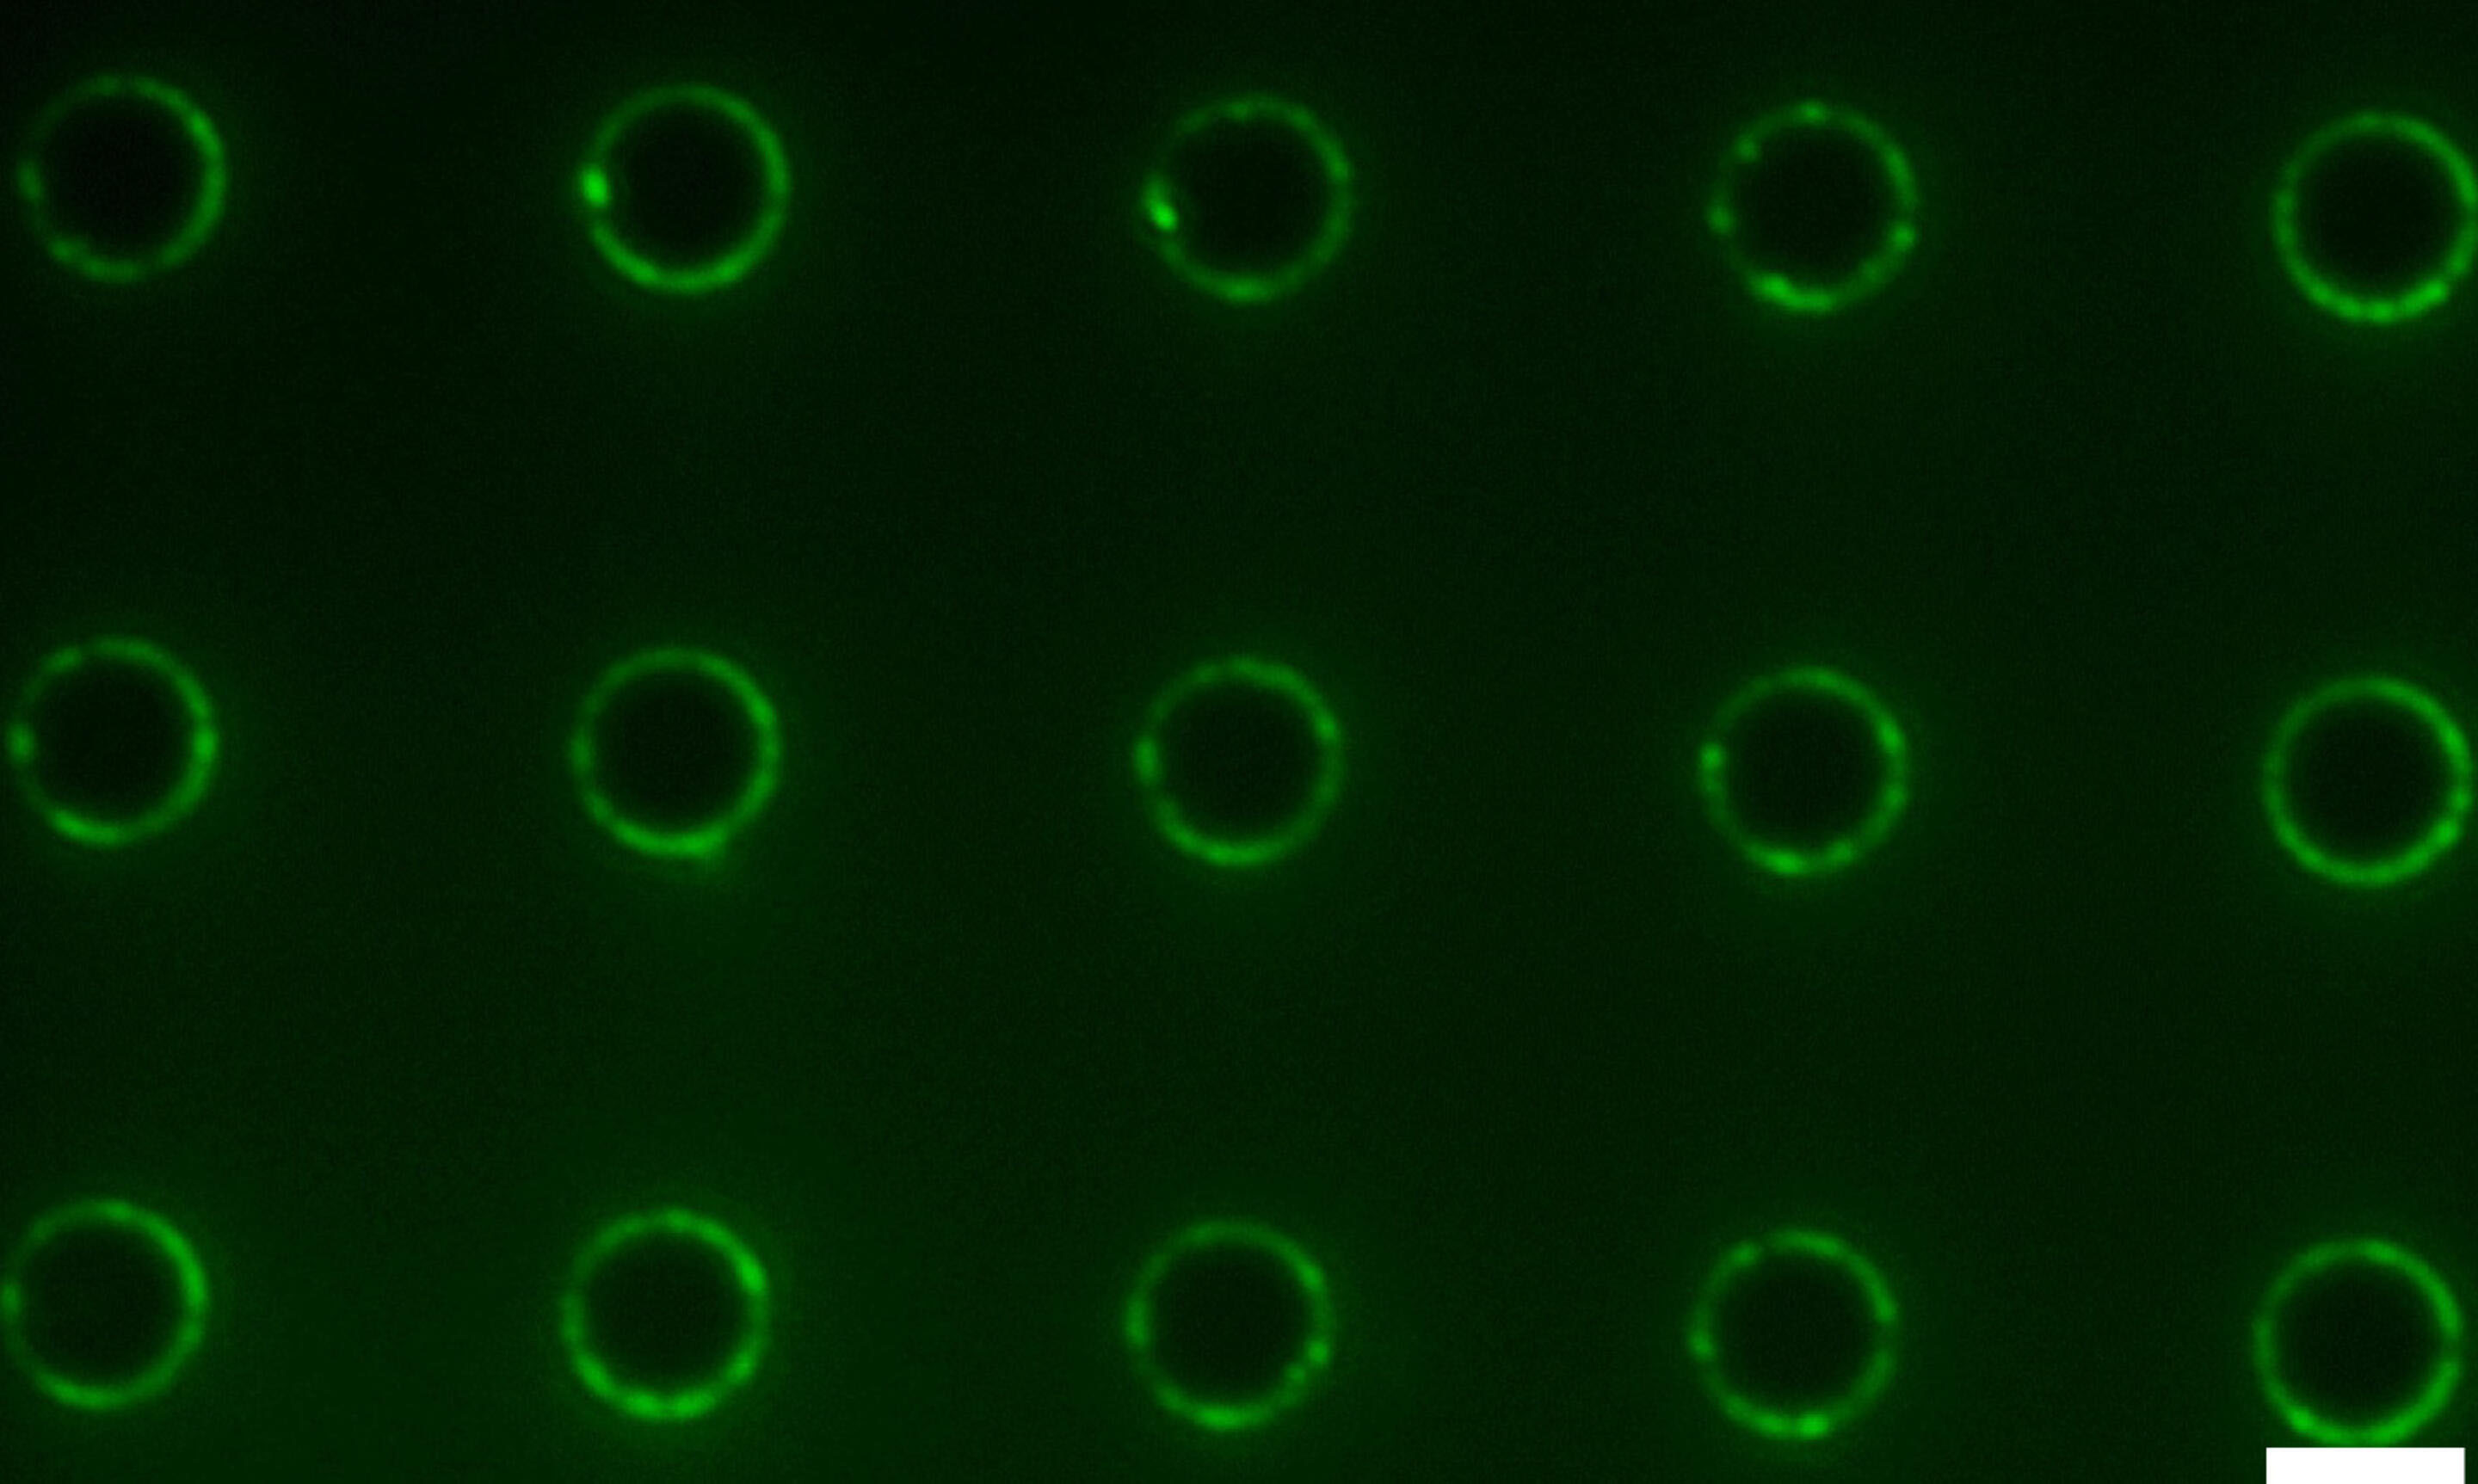 Fluorescence image of amphiphiles concentrated at the edges of micropillars on a microstructured surface